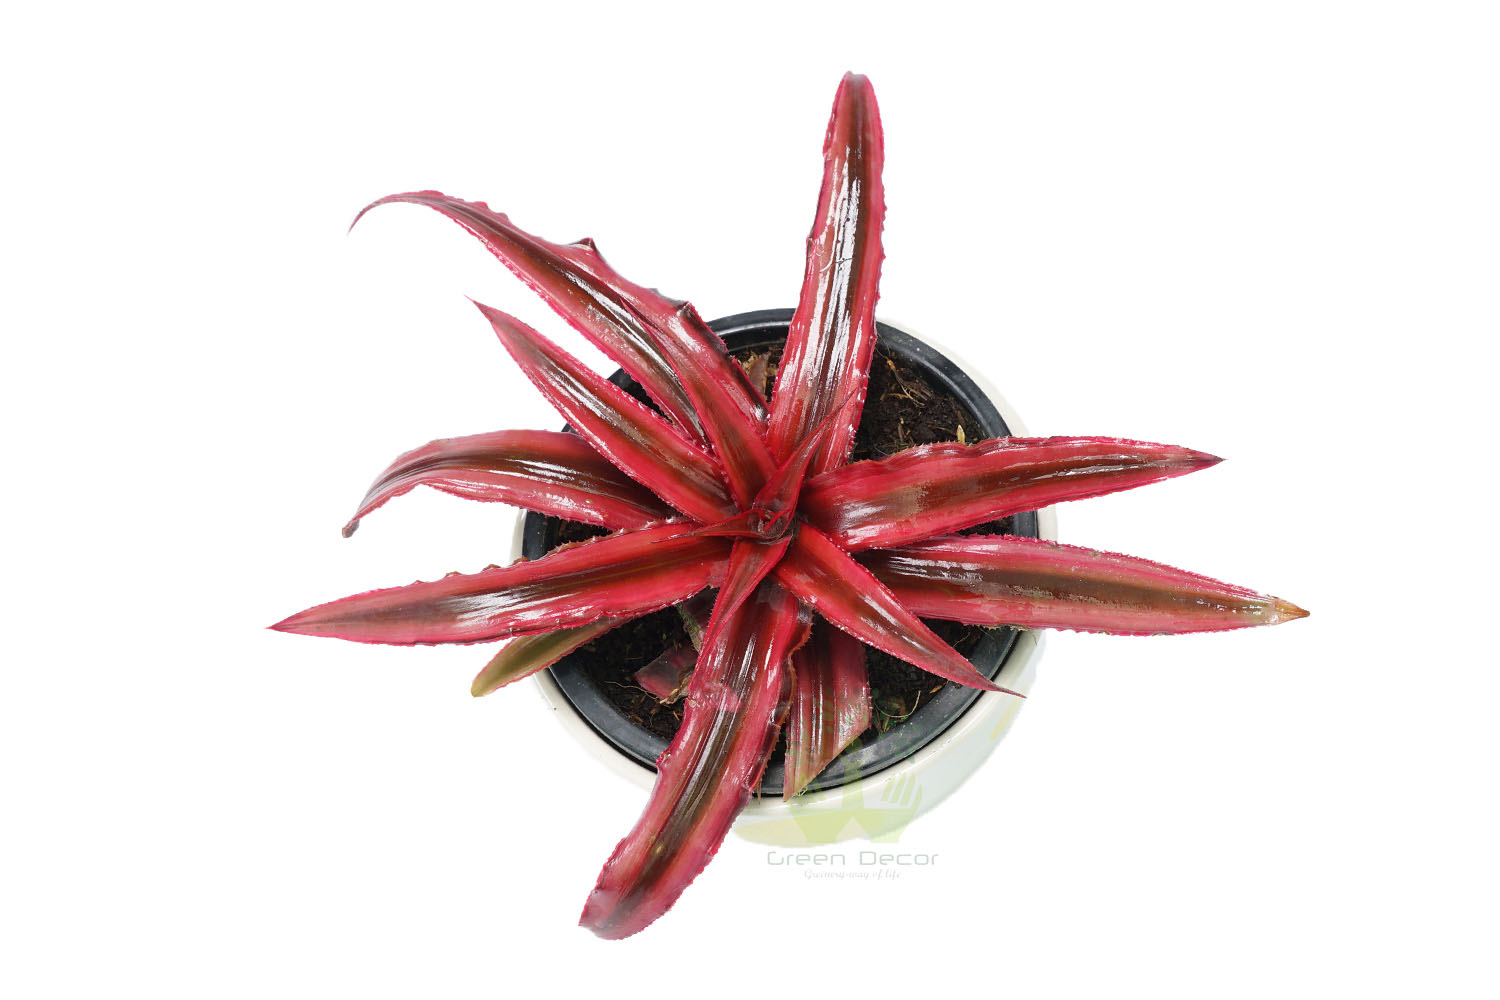 Buy Cryptanthus Plant Leaves View, White Pots and Seeds in Delhi NCR by the best online nursery shop Greendecor.